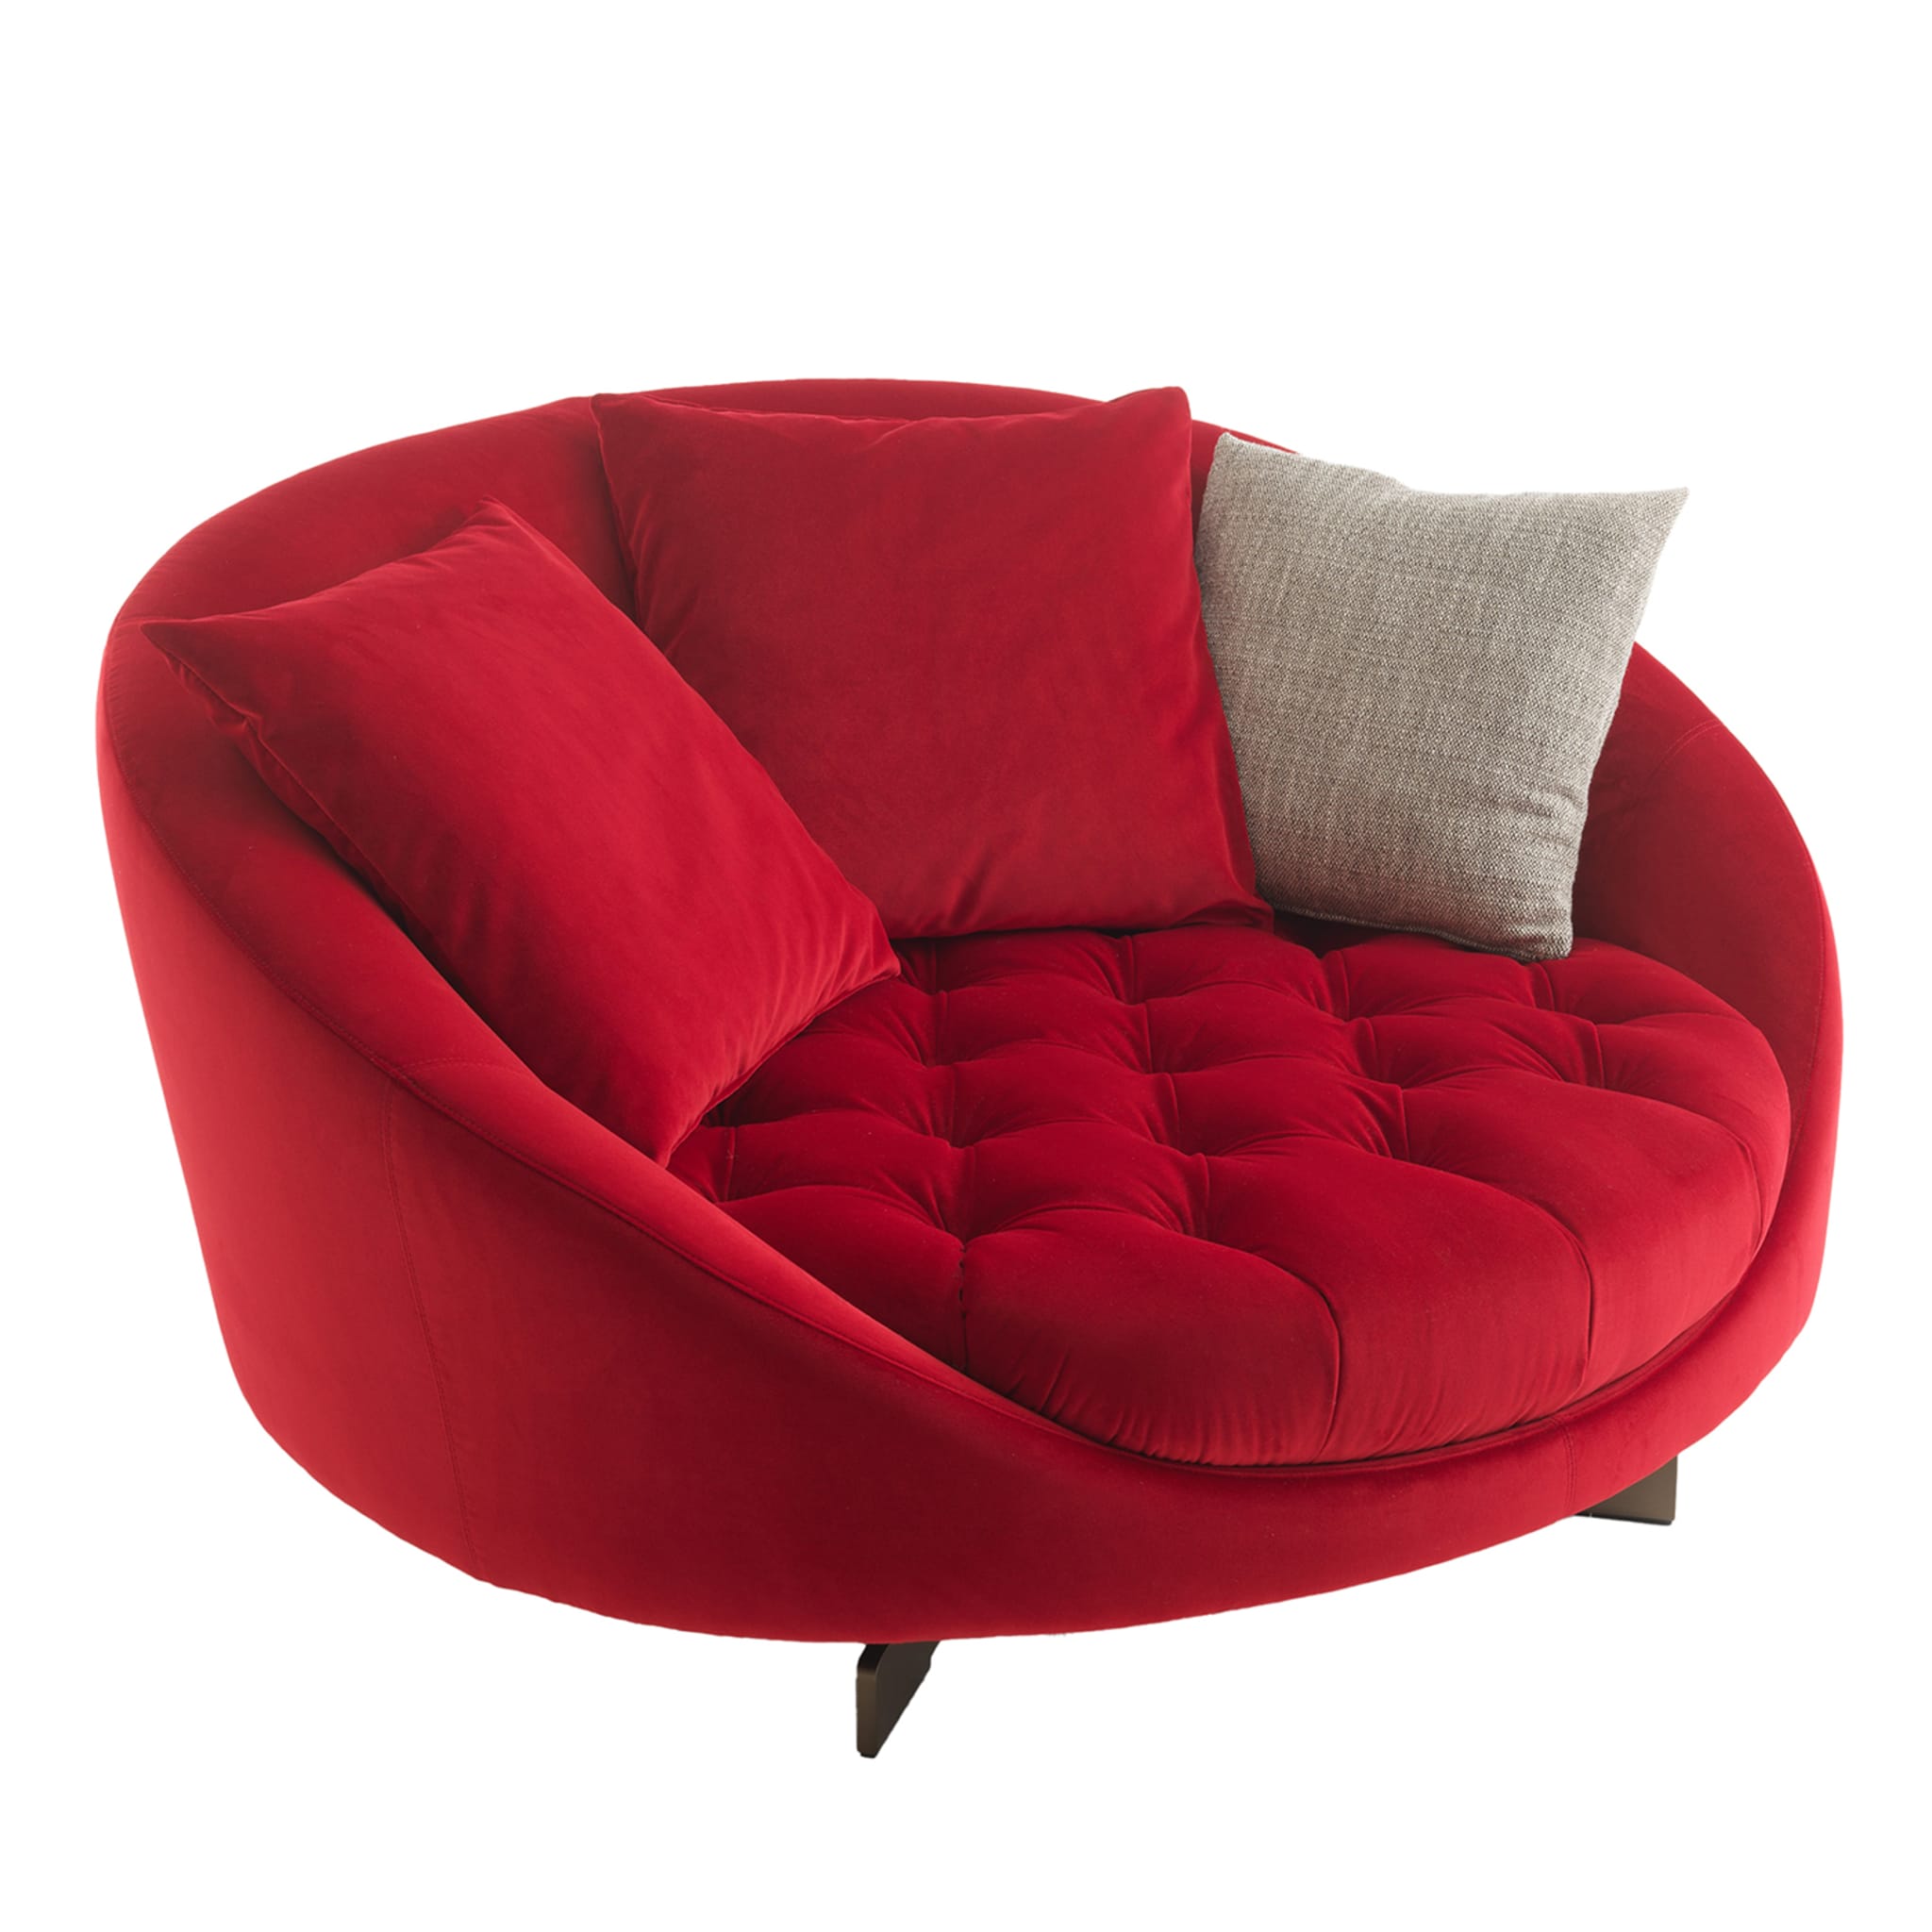 Hill Red sofa by Studio MA - Main view